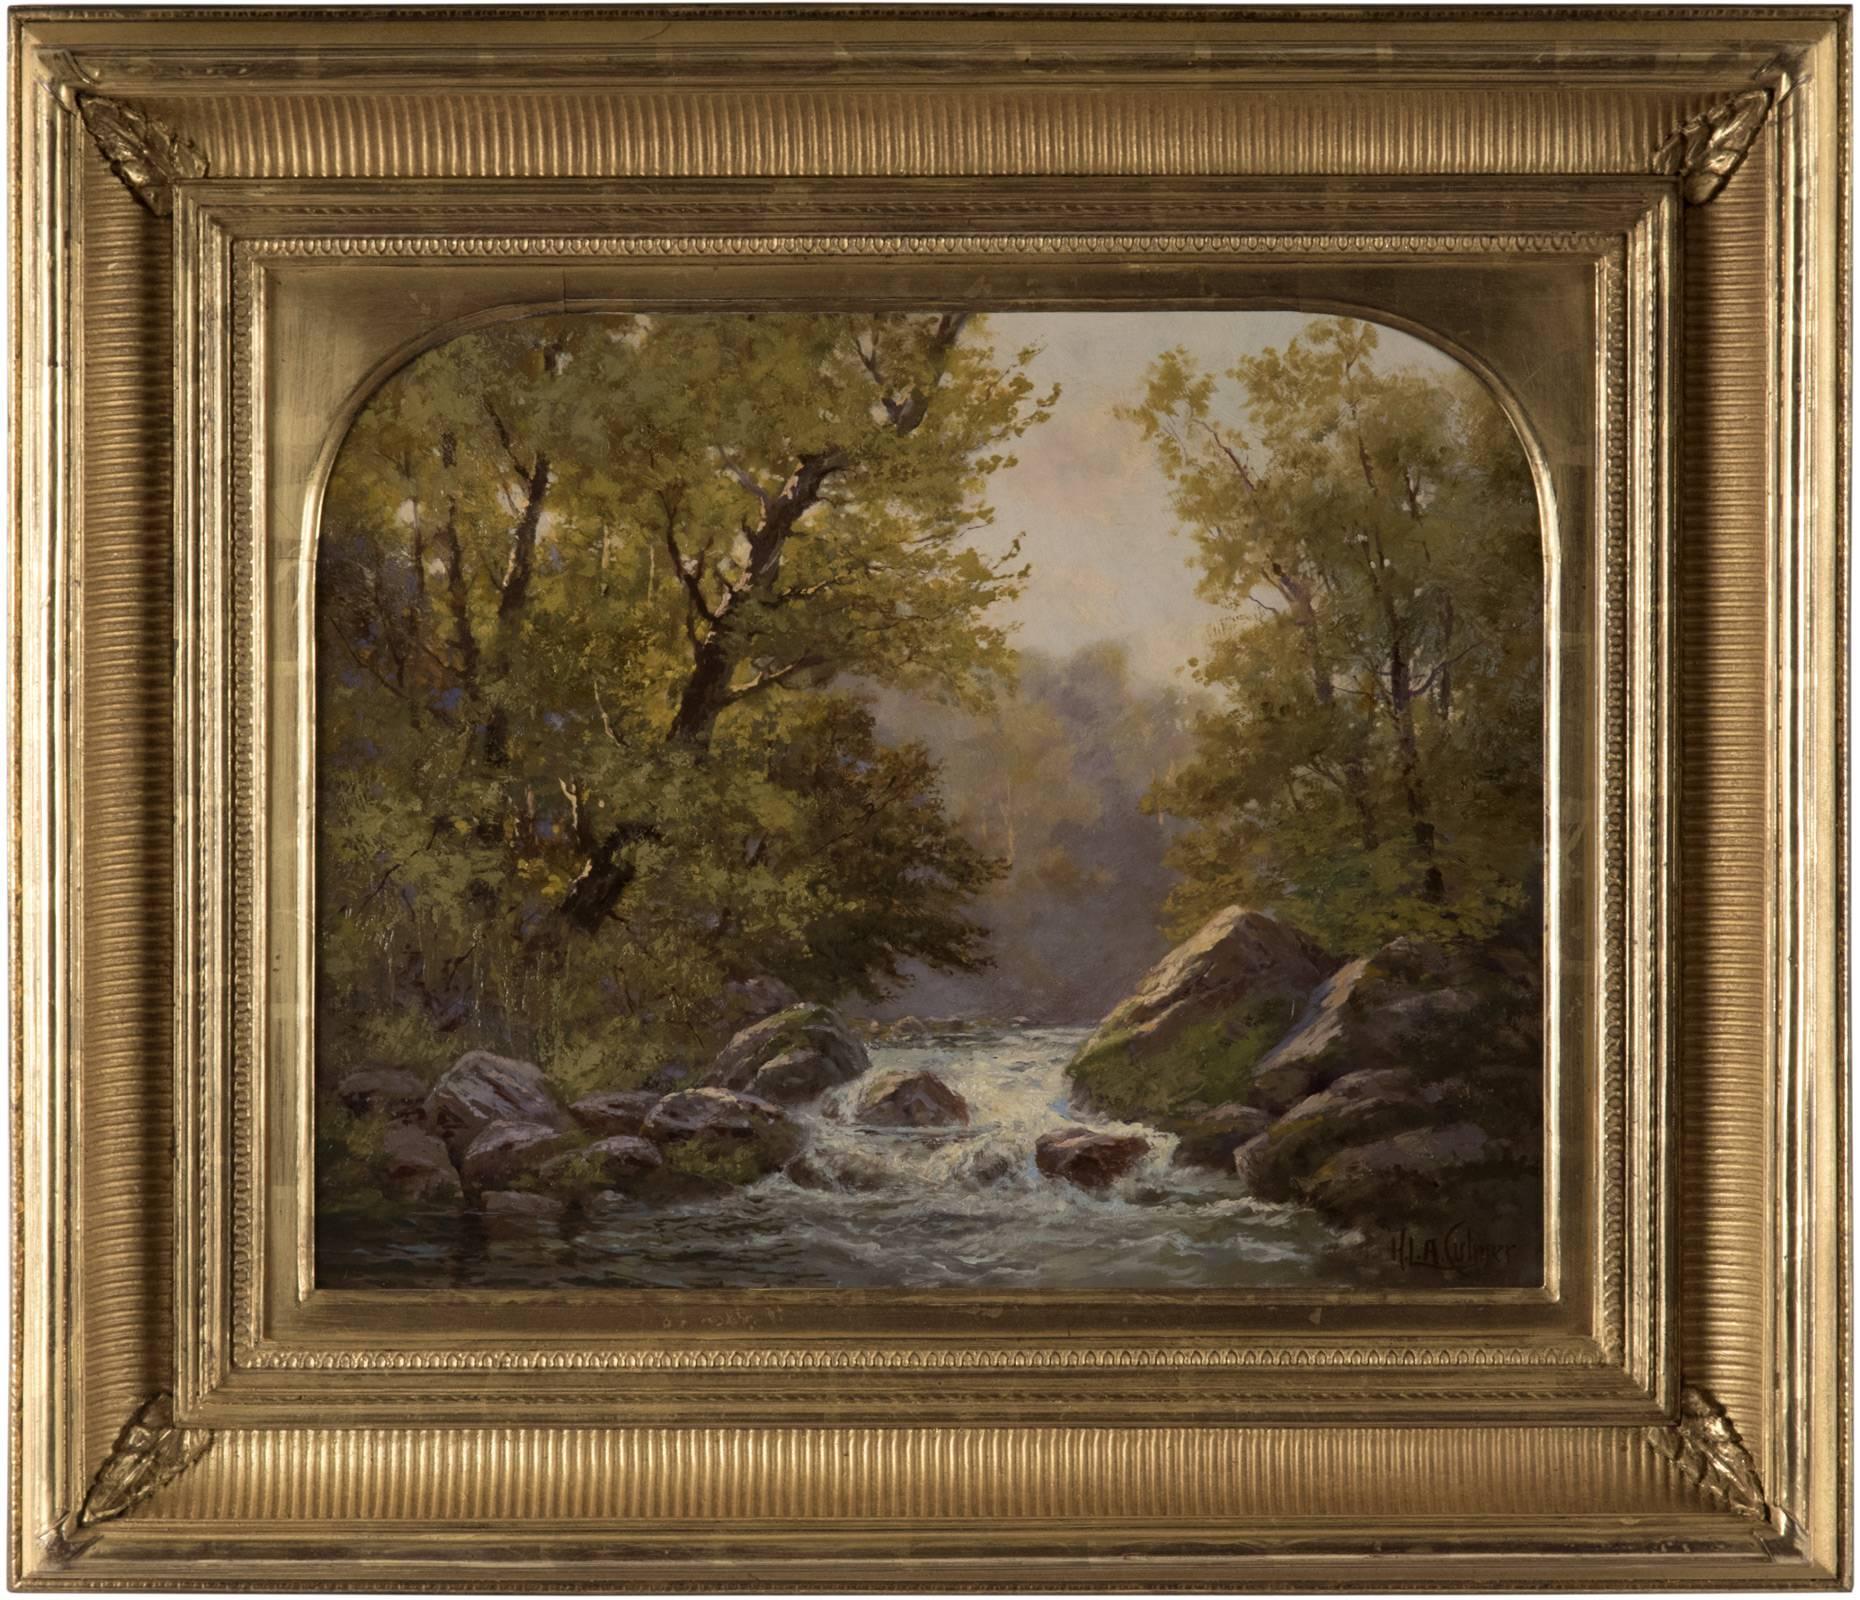 This oil on canvas scene shows a babbling Trout Brook with rock and grass banks through a thick forest. Pale blue sky can be seen beyond the narrow span of the trees, with the golden glow of sunlight piercing through the full trees. Culmer's keen